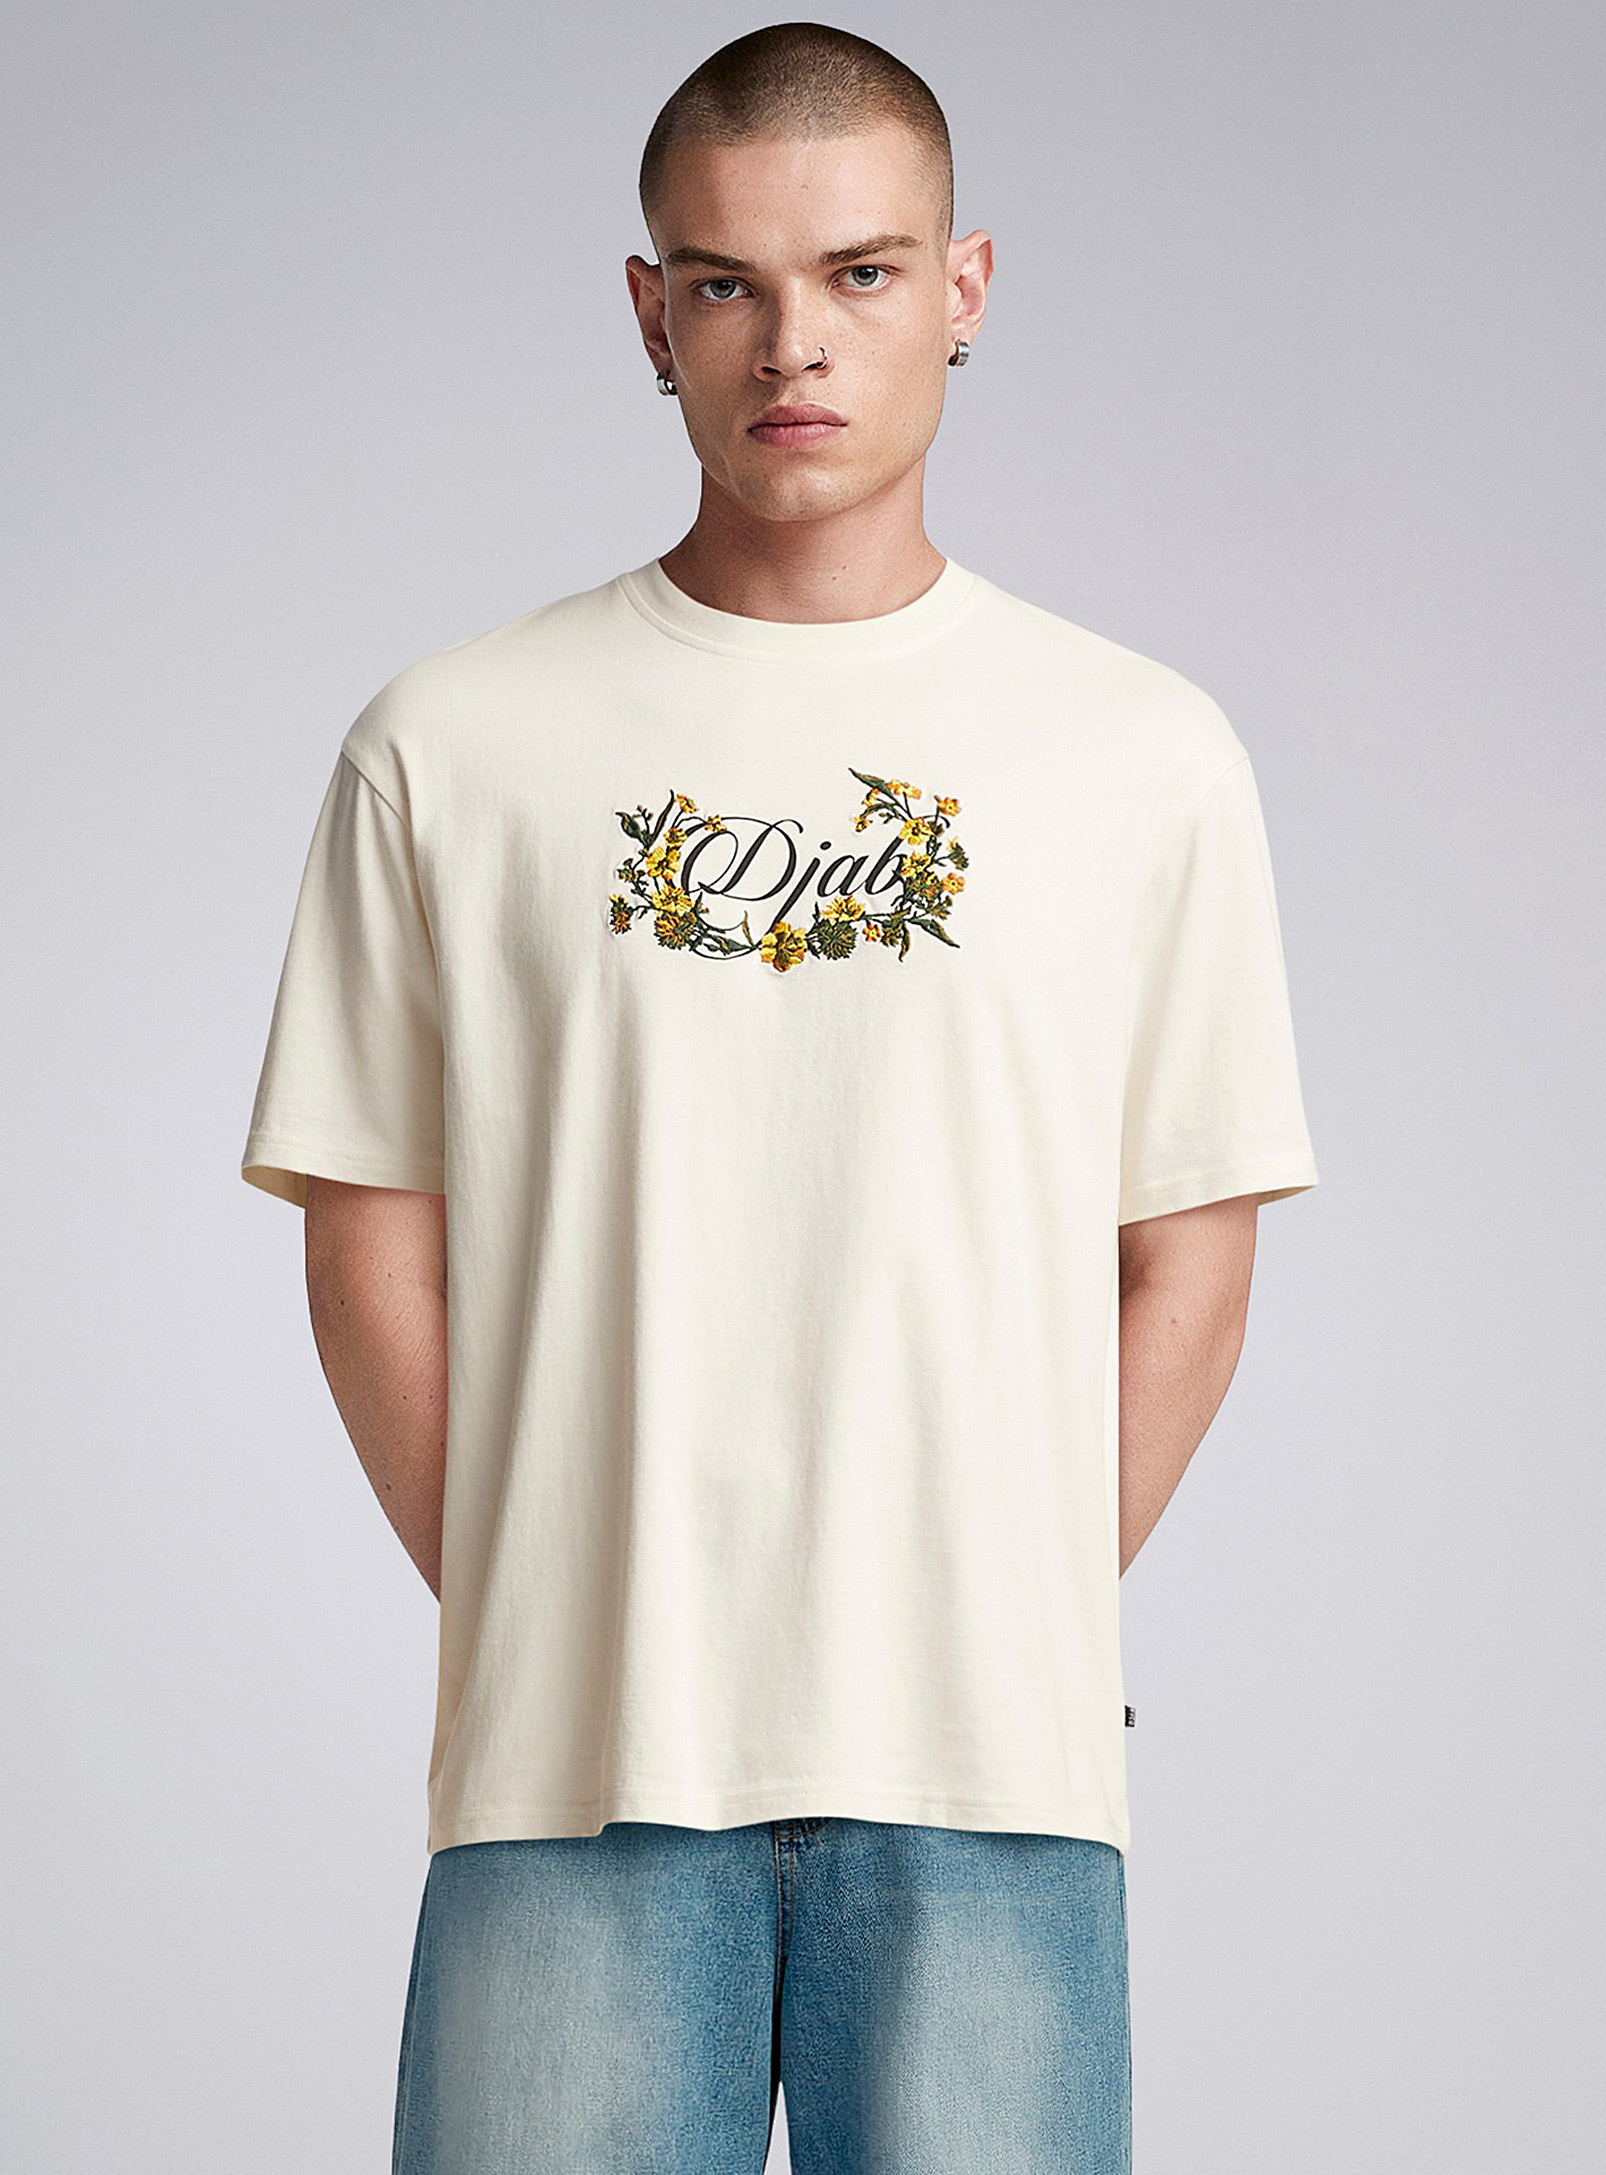 Djab - Men's Floral embroidery logo T-shirt Boxy fit